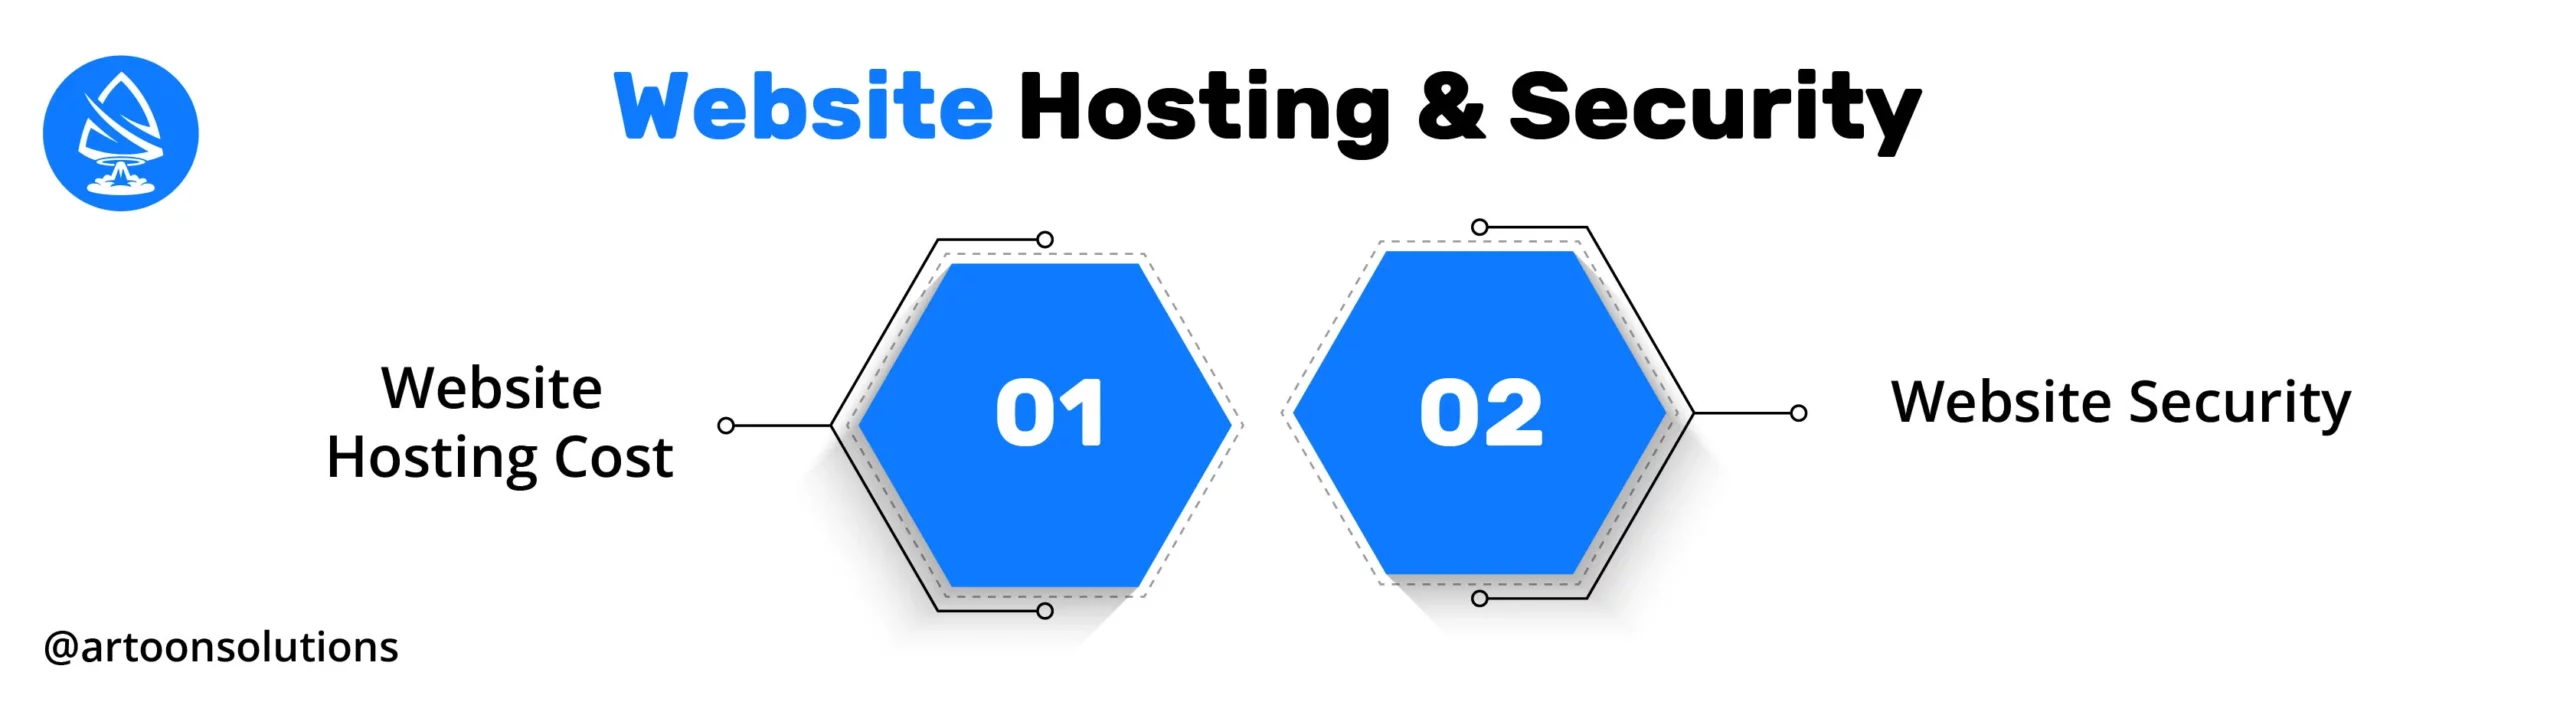 Website Hosting and Security 